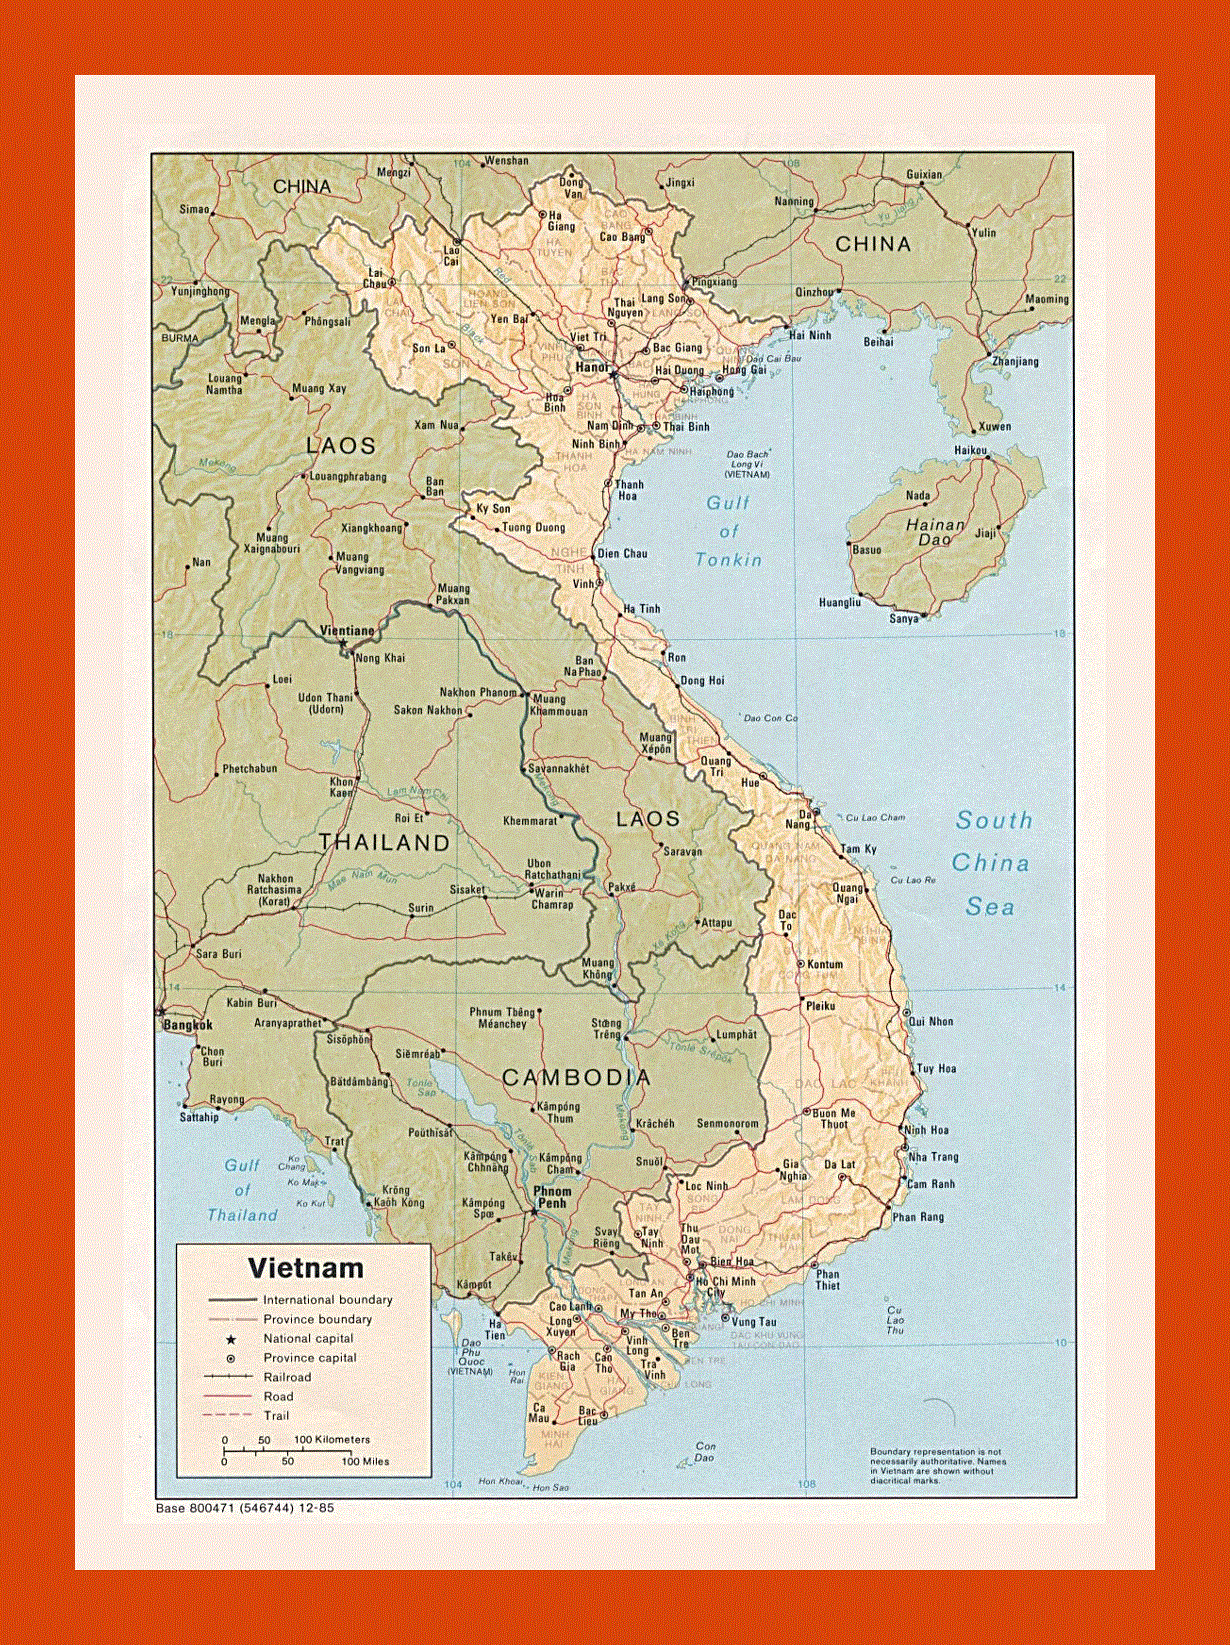 Political and administrative map of Vietnam - 1985